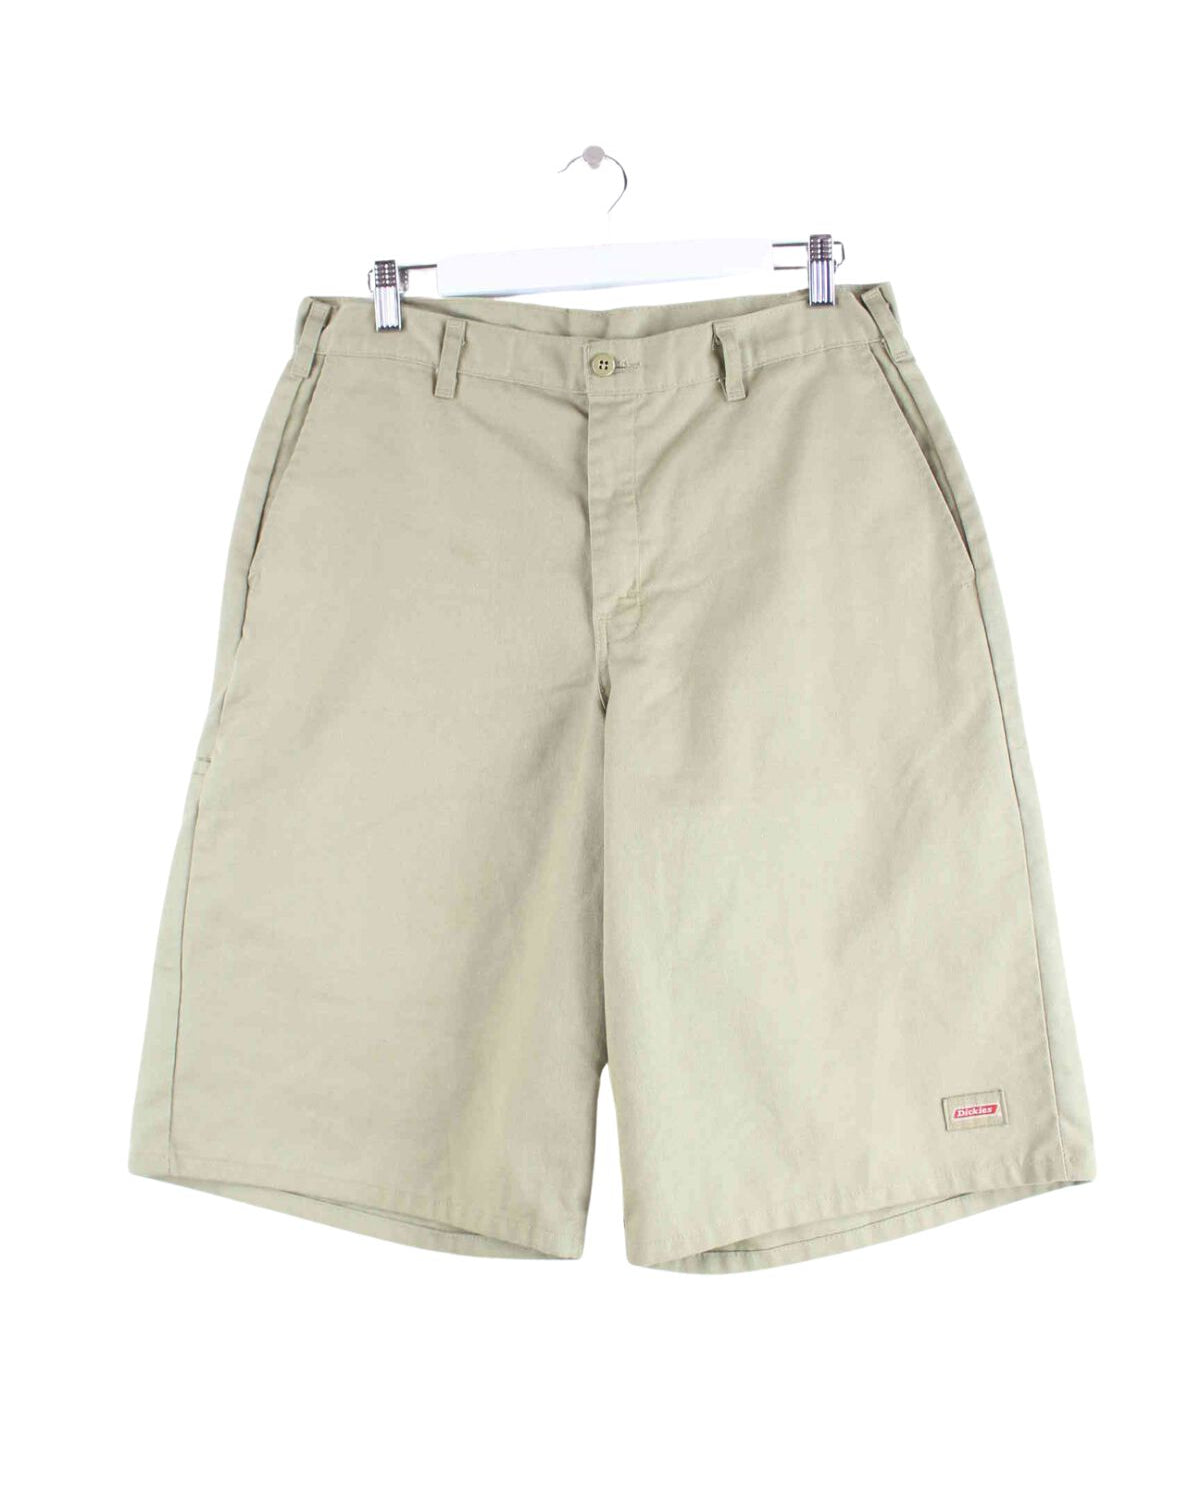 Dickies Workwear Chino Shorts Beige W34 (front image)